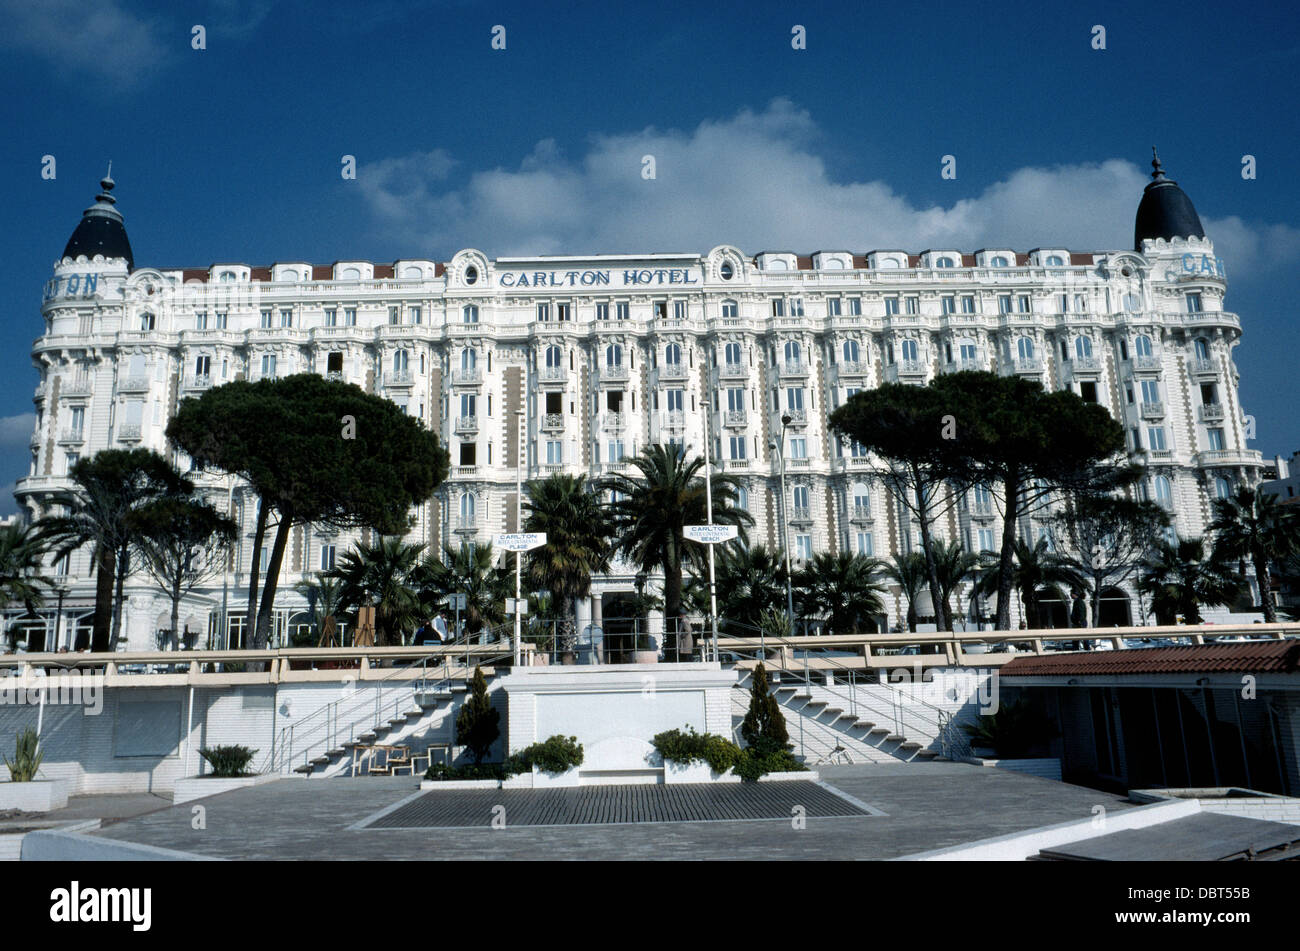 The art-deco InterContinental Carlton Hotel on the French Riviera in Cannes, France, celebrated its 100th anniversary in 2013. Stock Photo